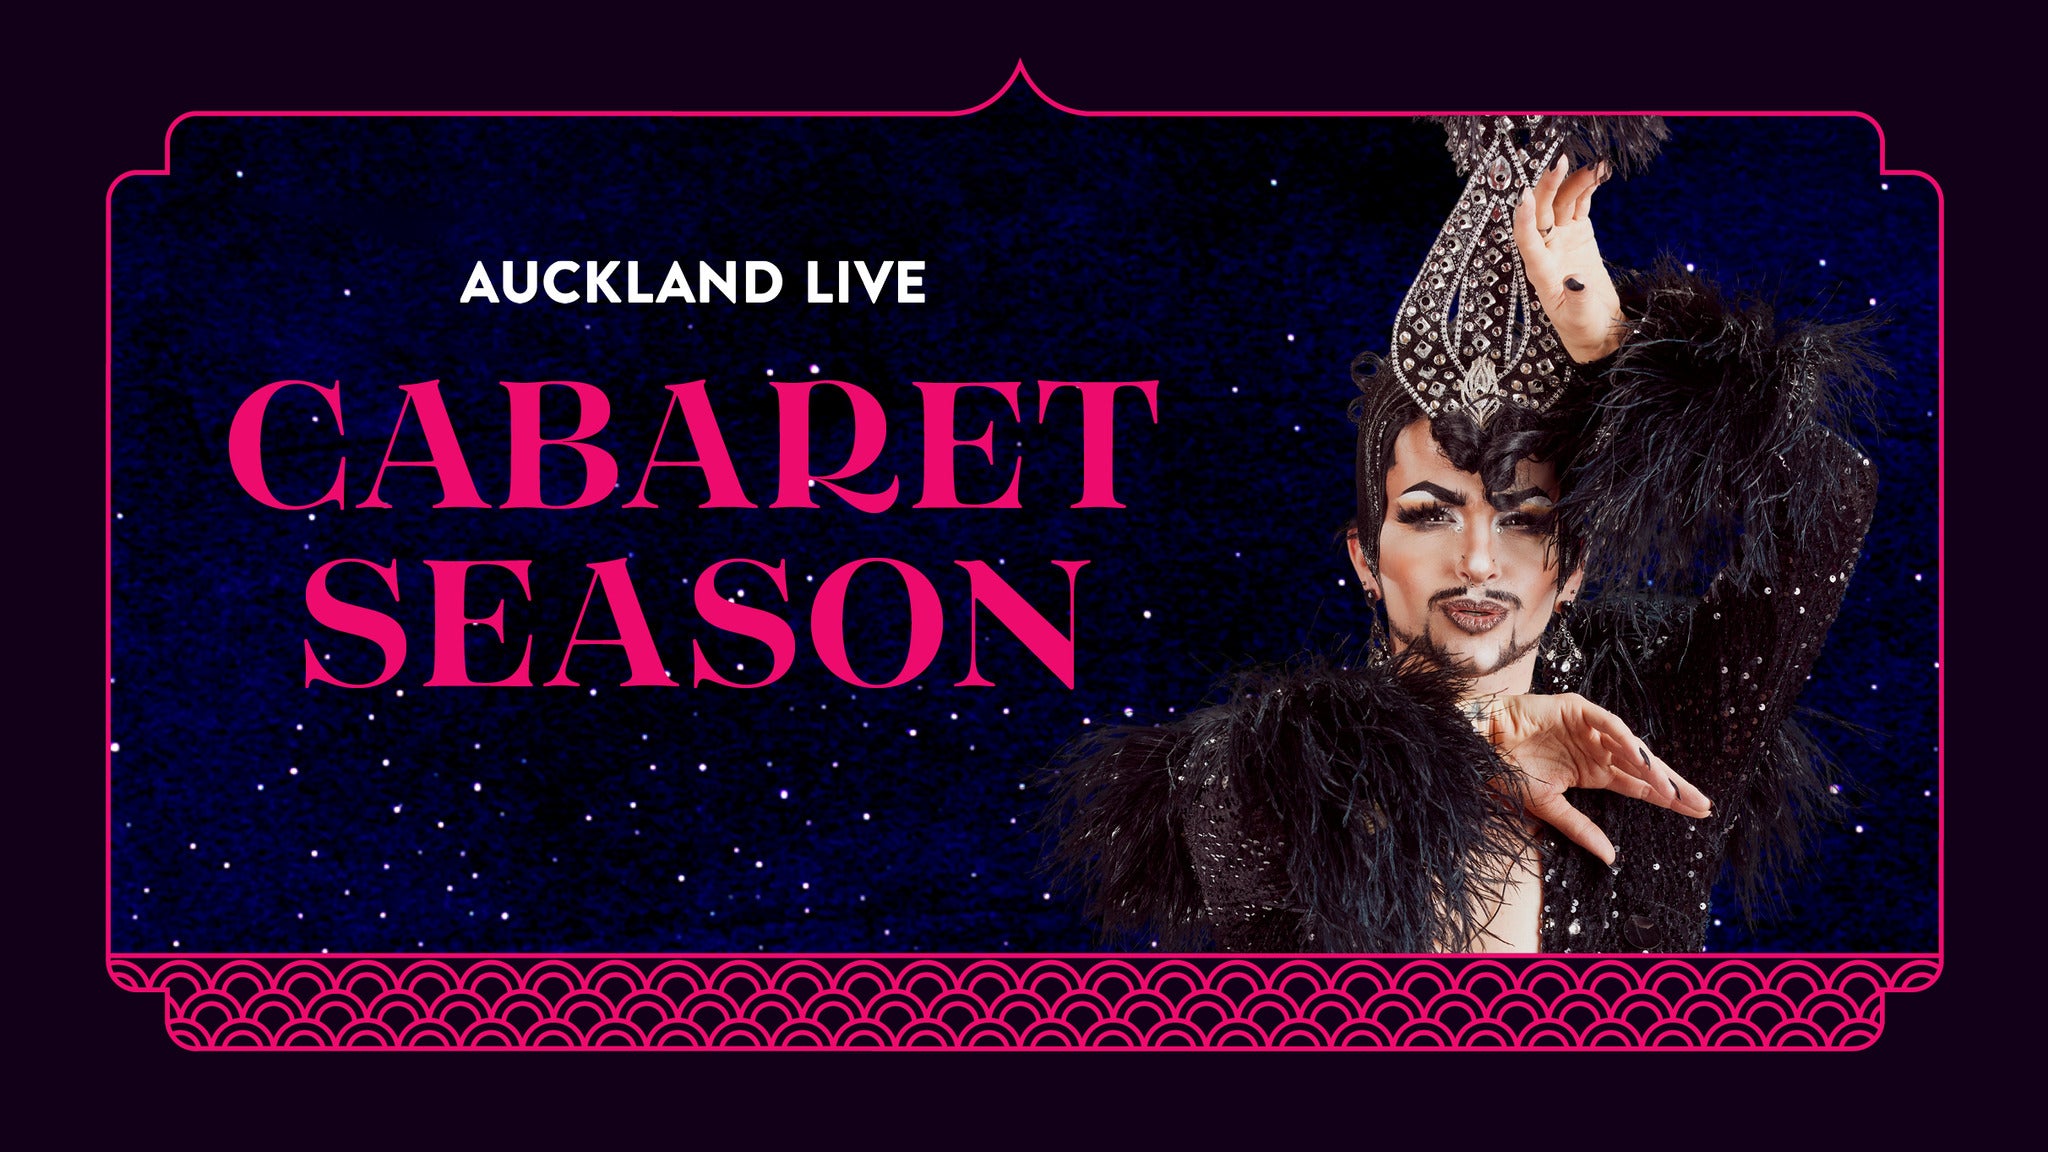 Image used with permission from Ticketmaster | Champagne & Cabaret with The Madeleines tickets